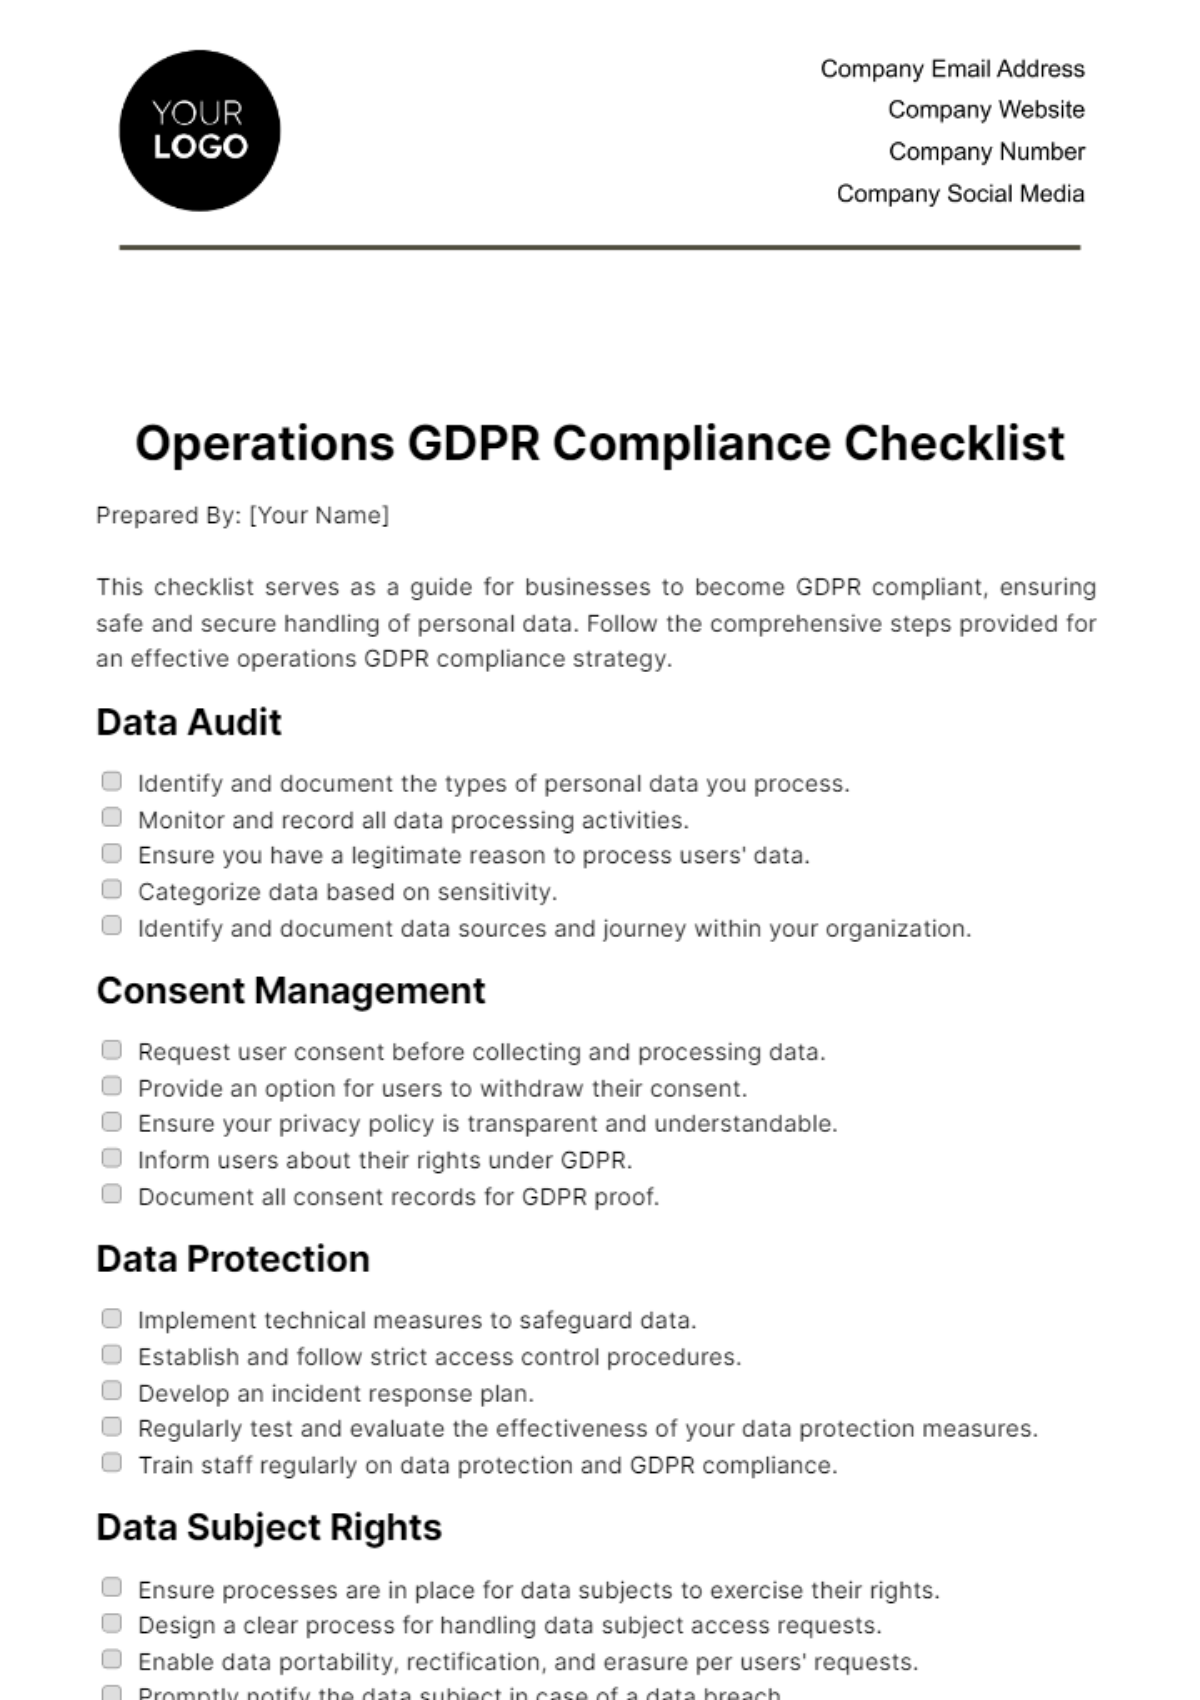 Free Operations GDPR Compliance Checklist Template